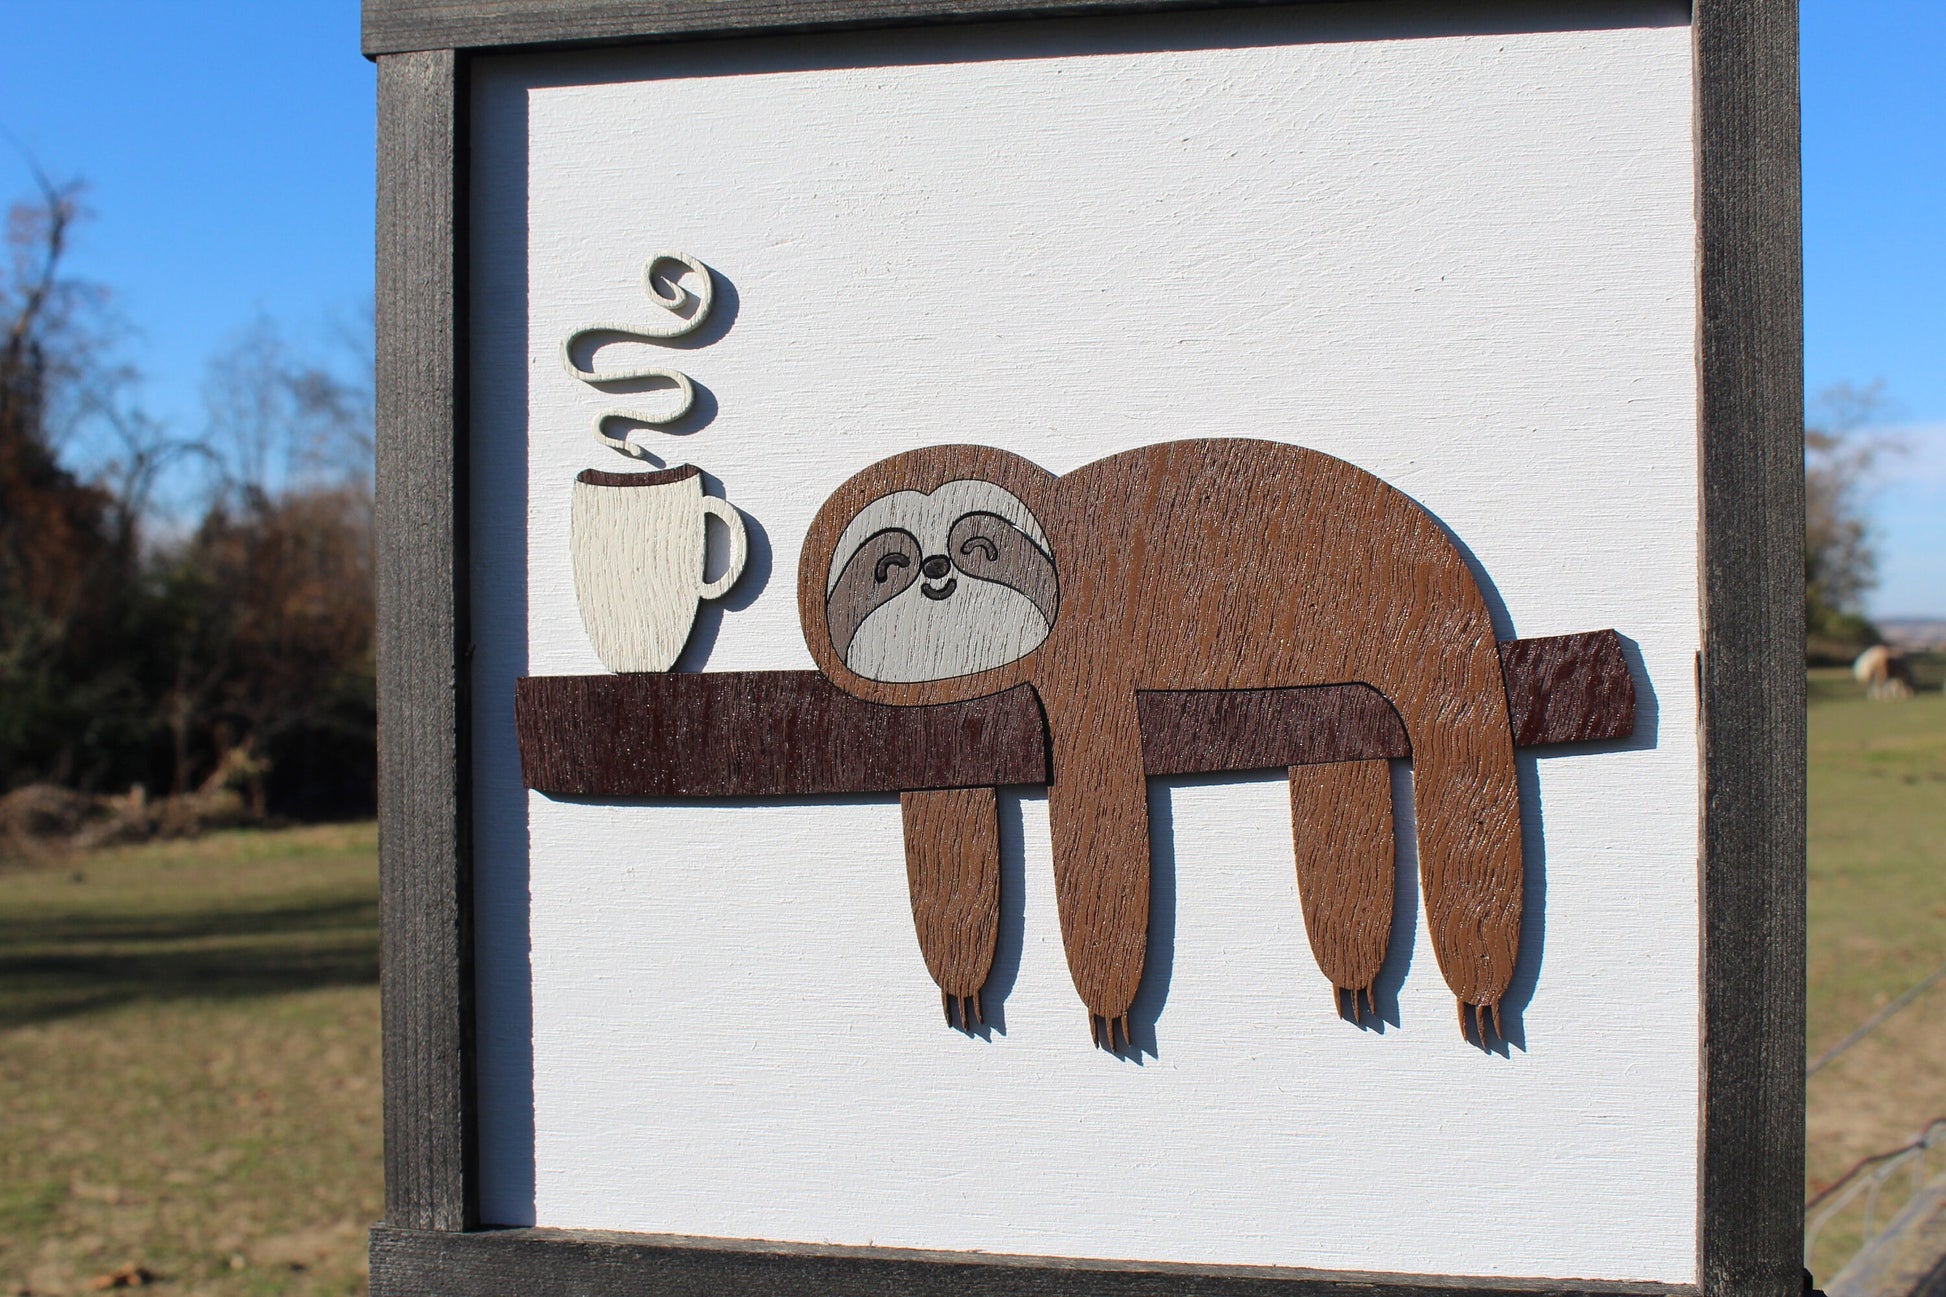 Tired Sloth Drinking Coffee 3D Raised Image Wood Sign Country Primitive Wall Decoration Passed Out Hot Chocolate Energy Sleepy Décor